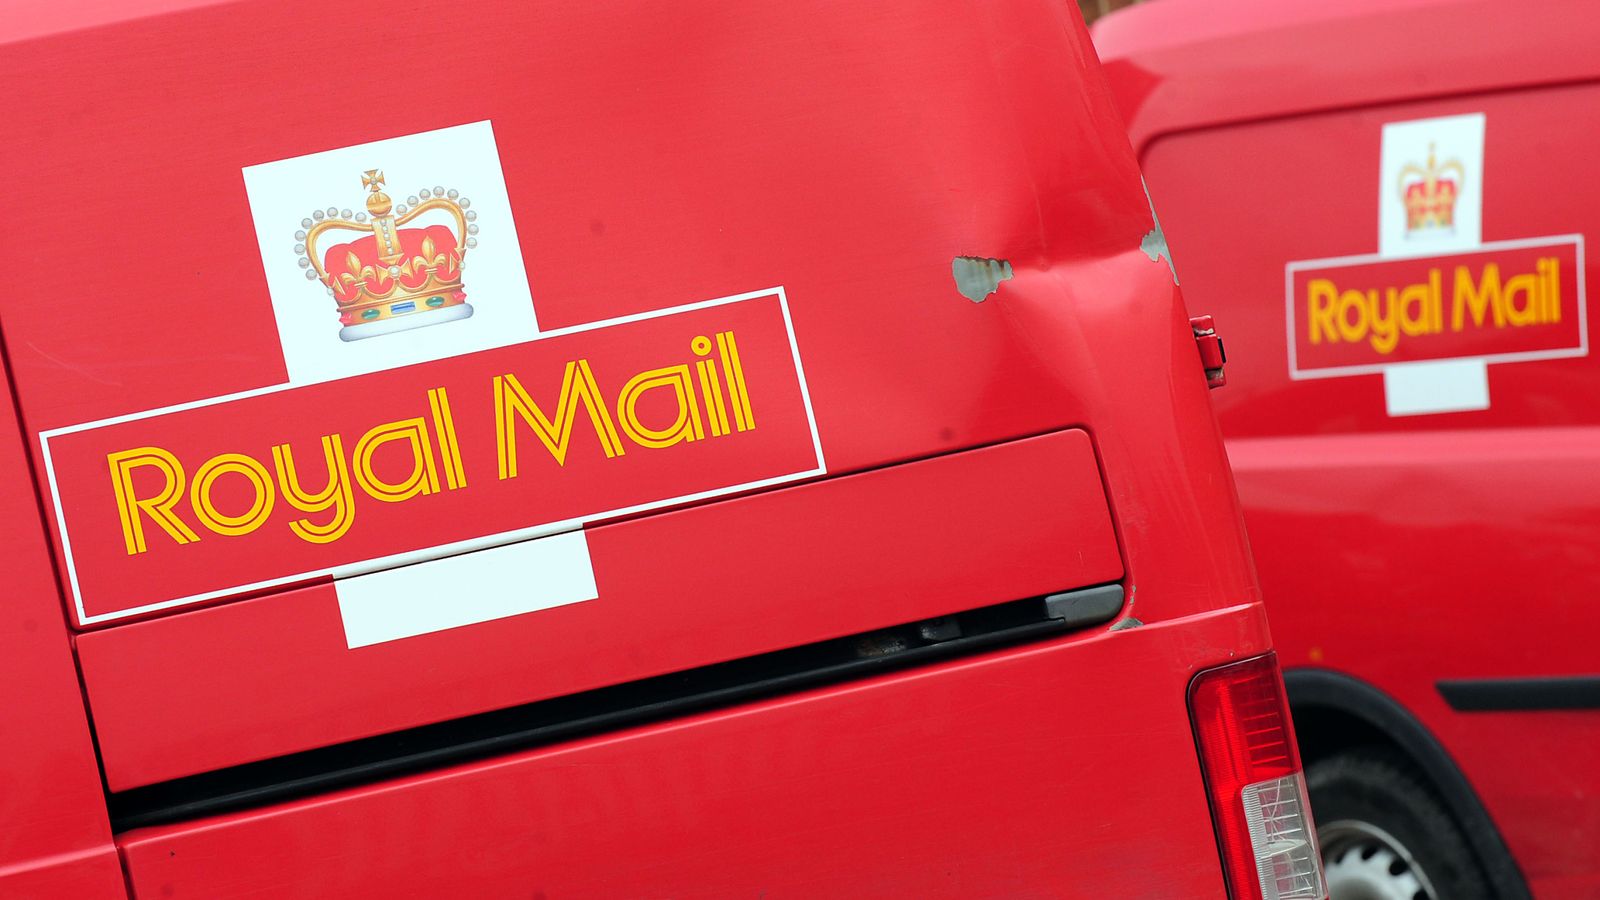 Pay talks between Royal Mail and CWU conclude without agreement